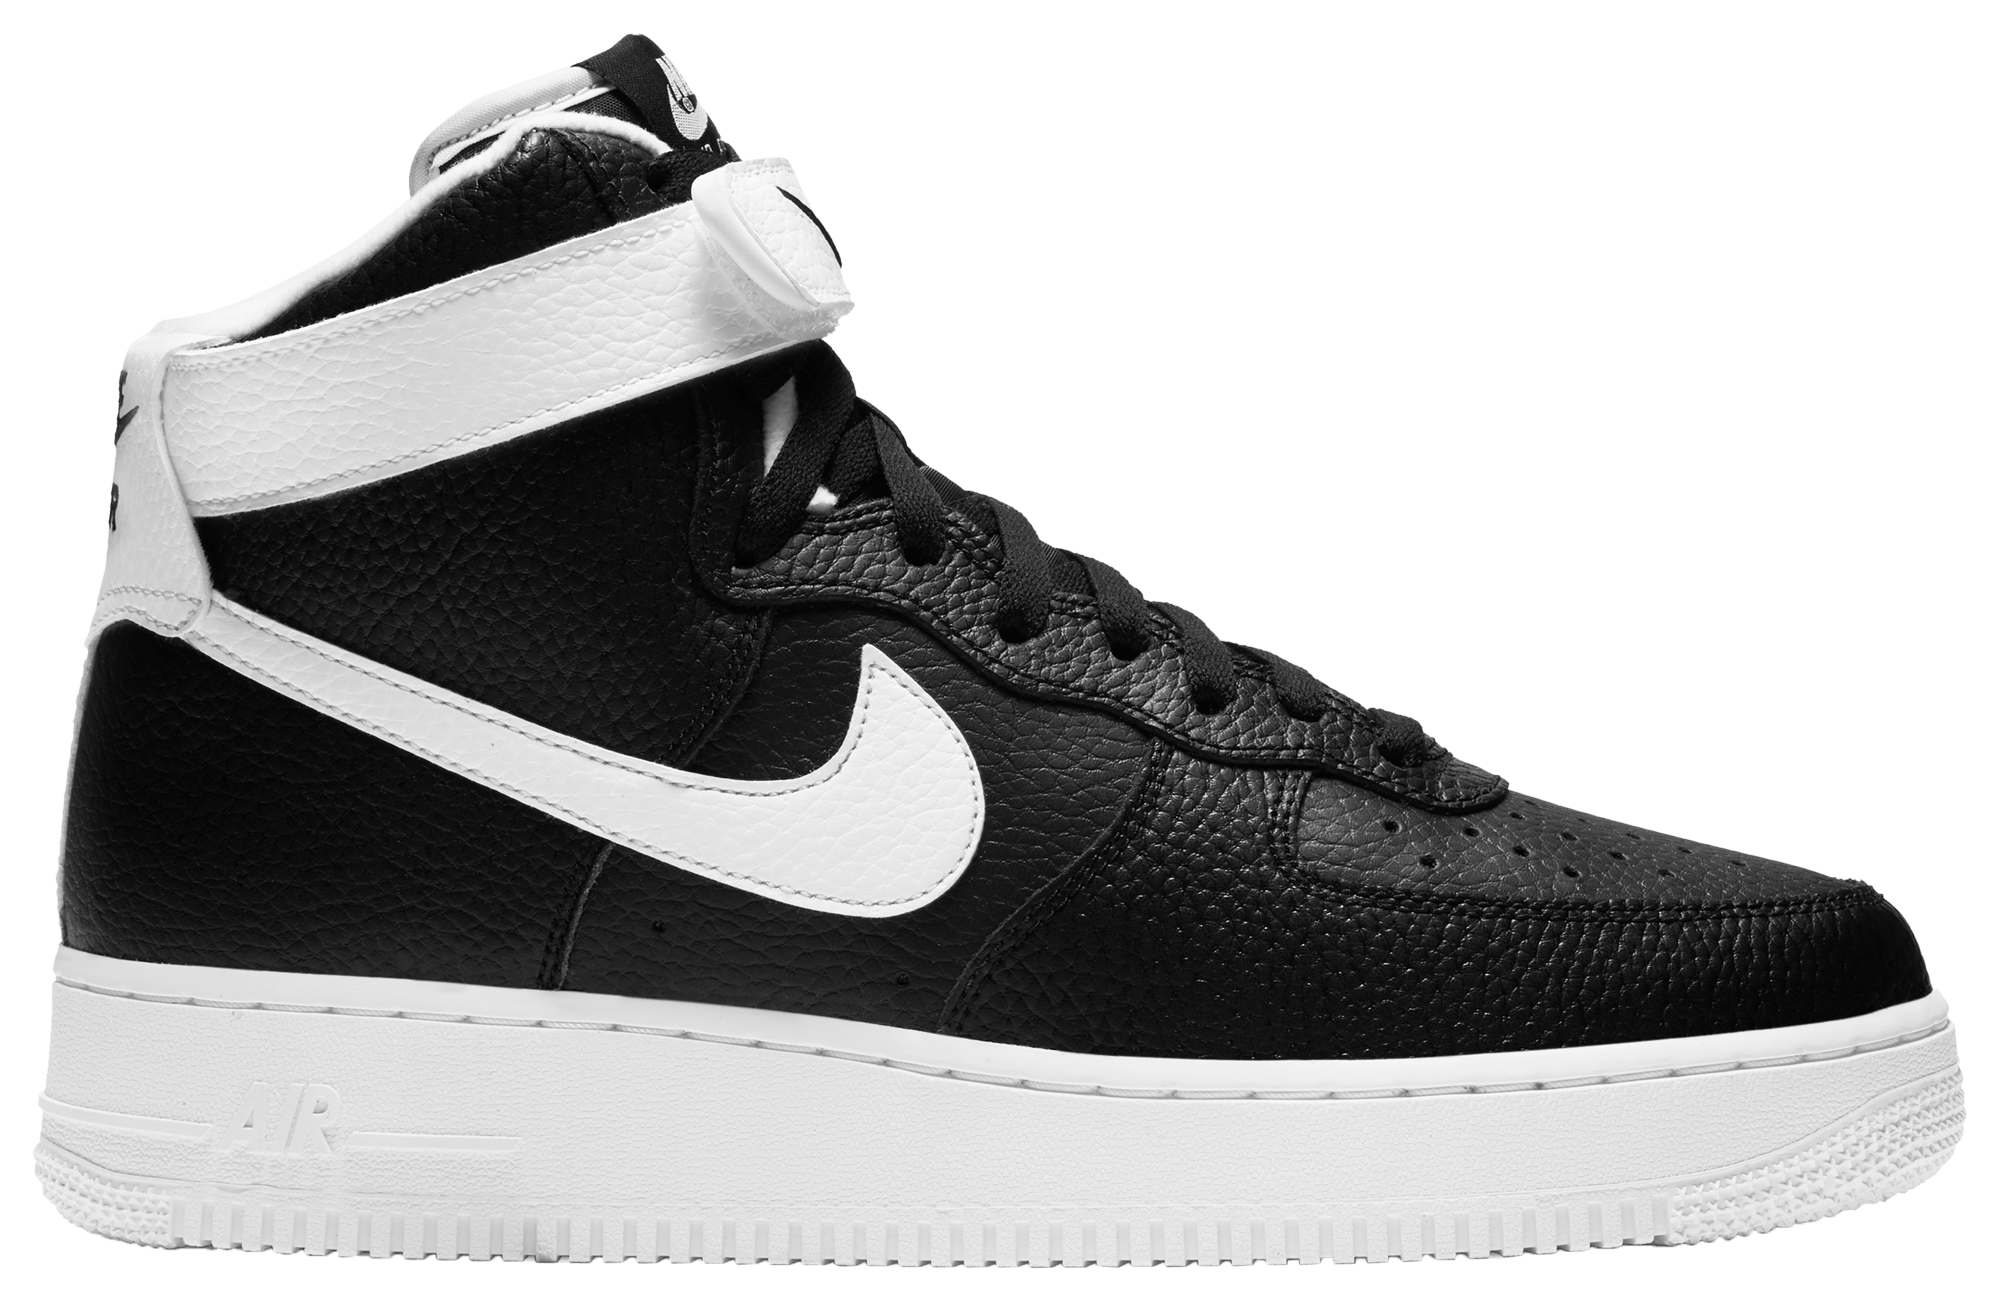 white and black high top air forces